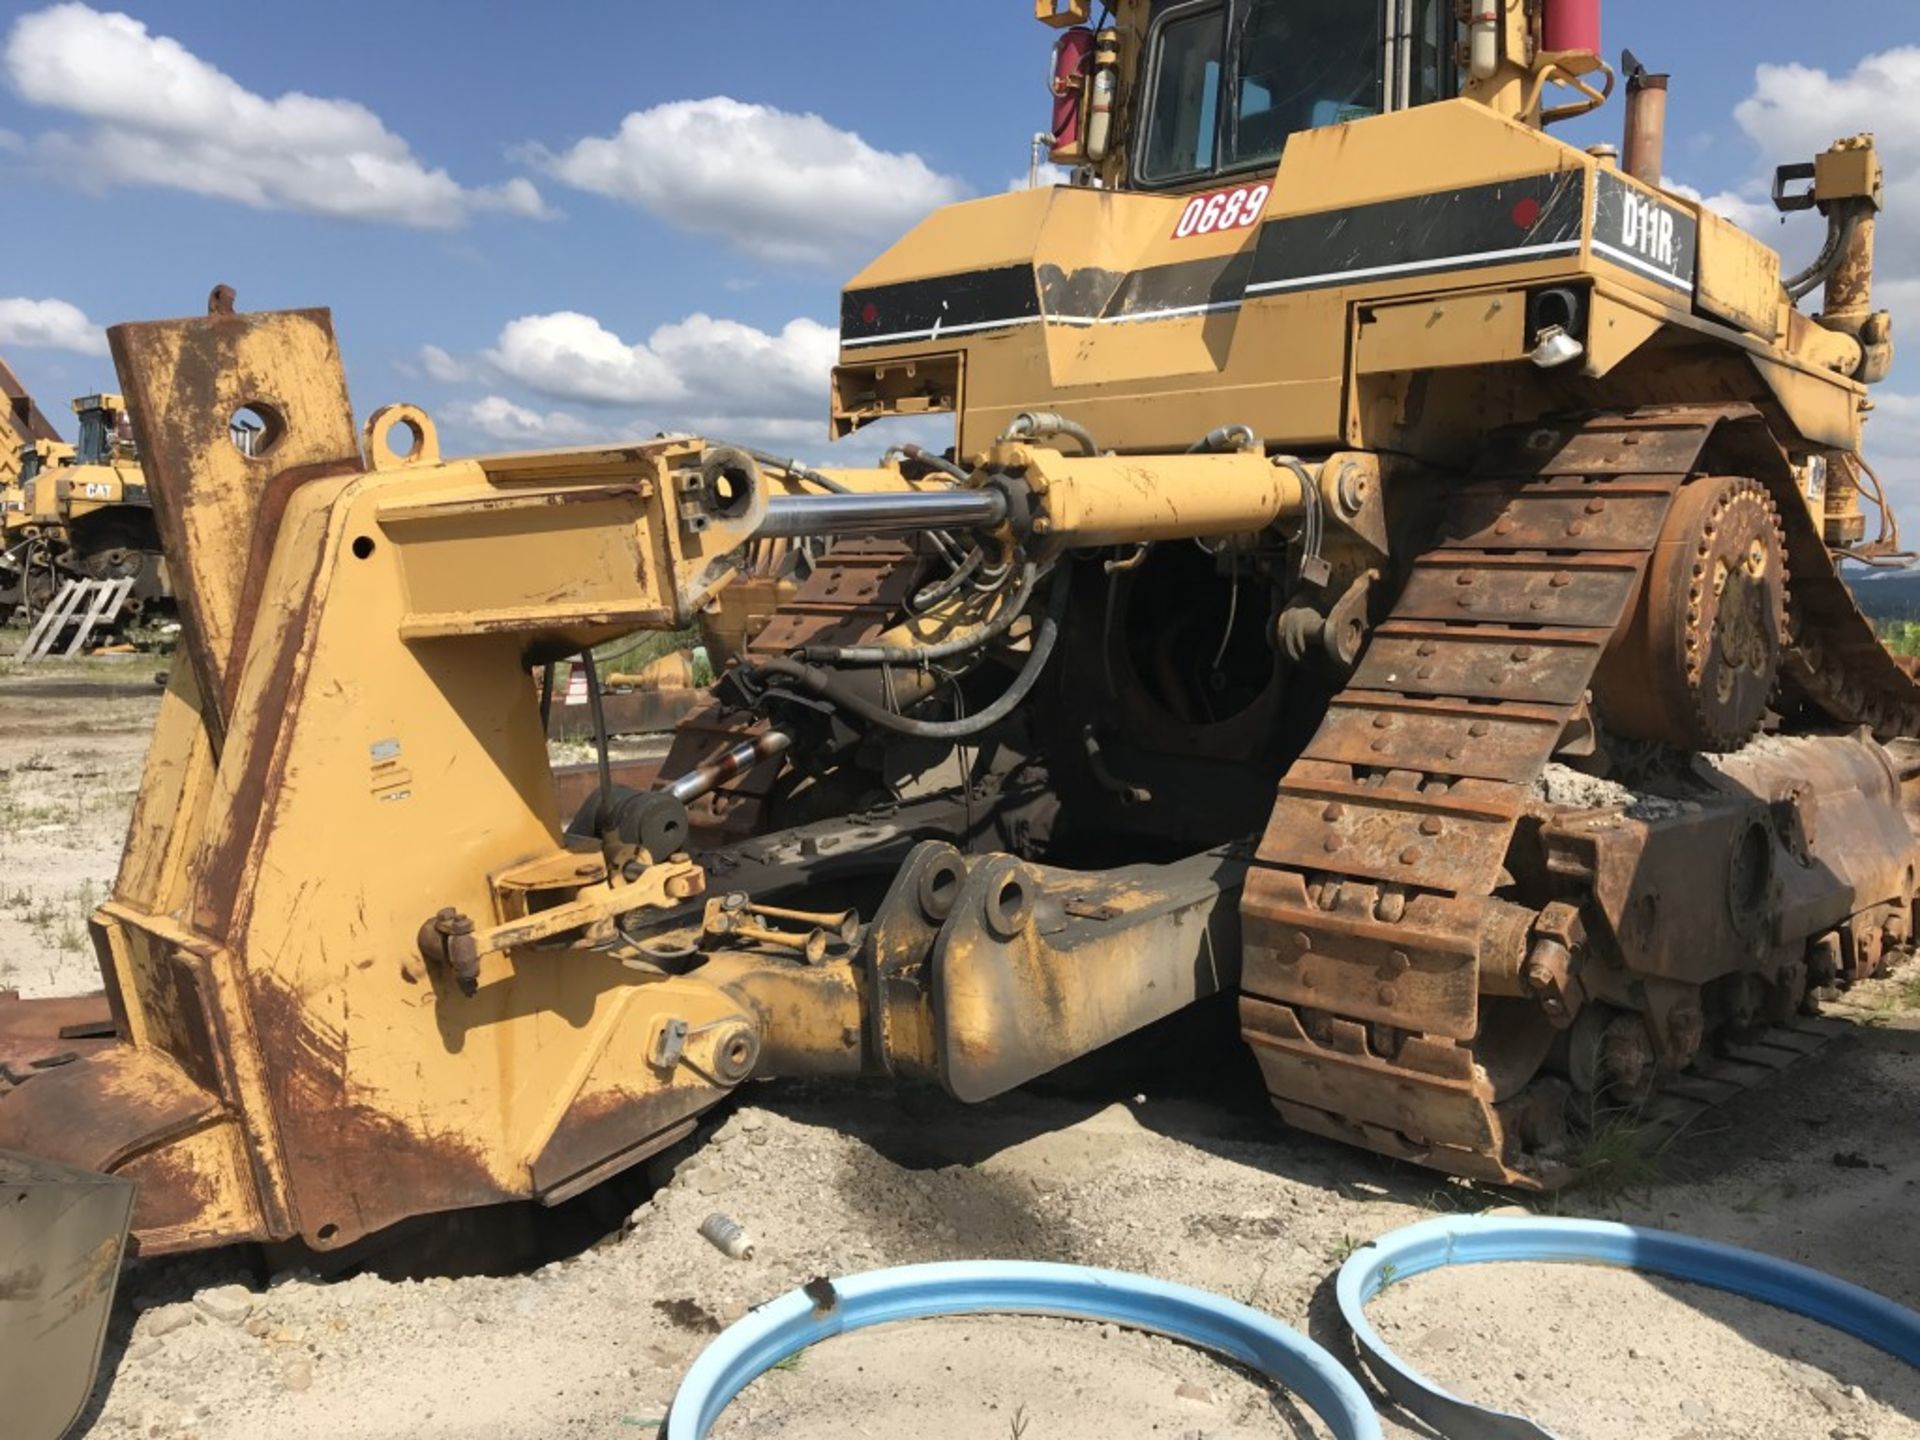 CAT D11R DOZER FOR PARTS, S/N: 7PZ00689, CAT 3508B TURBO DIESEL ENGINE, COMES W/ 20'8'' WIDE BLADE - Image 5 of 19